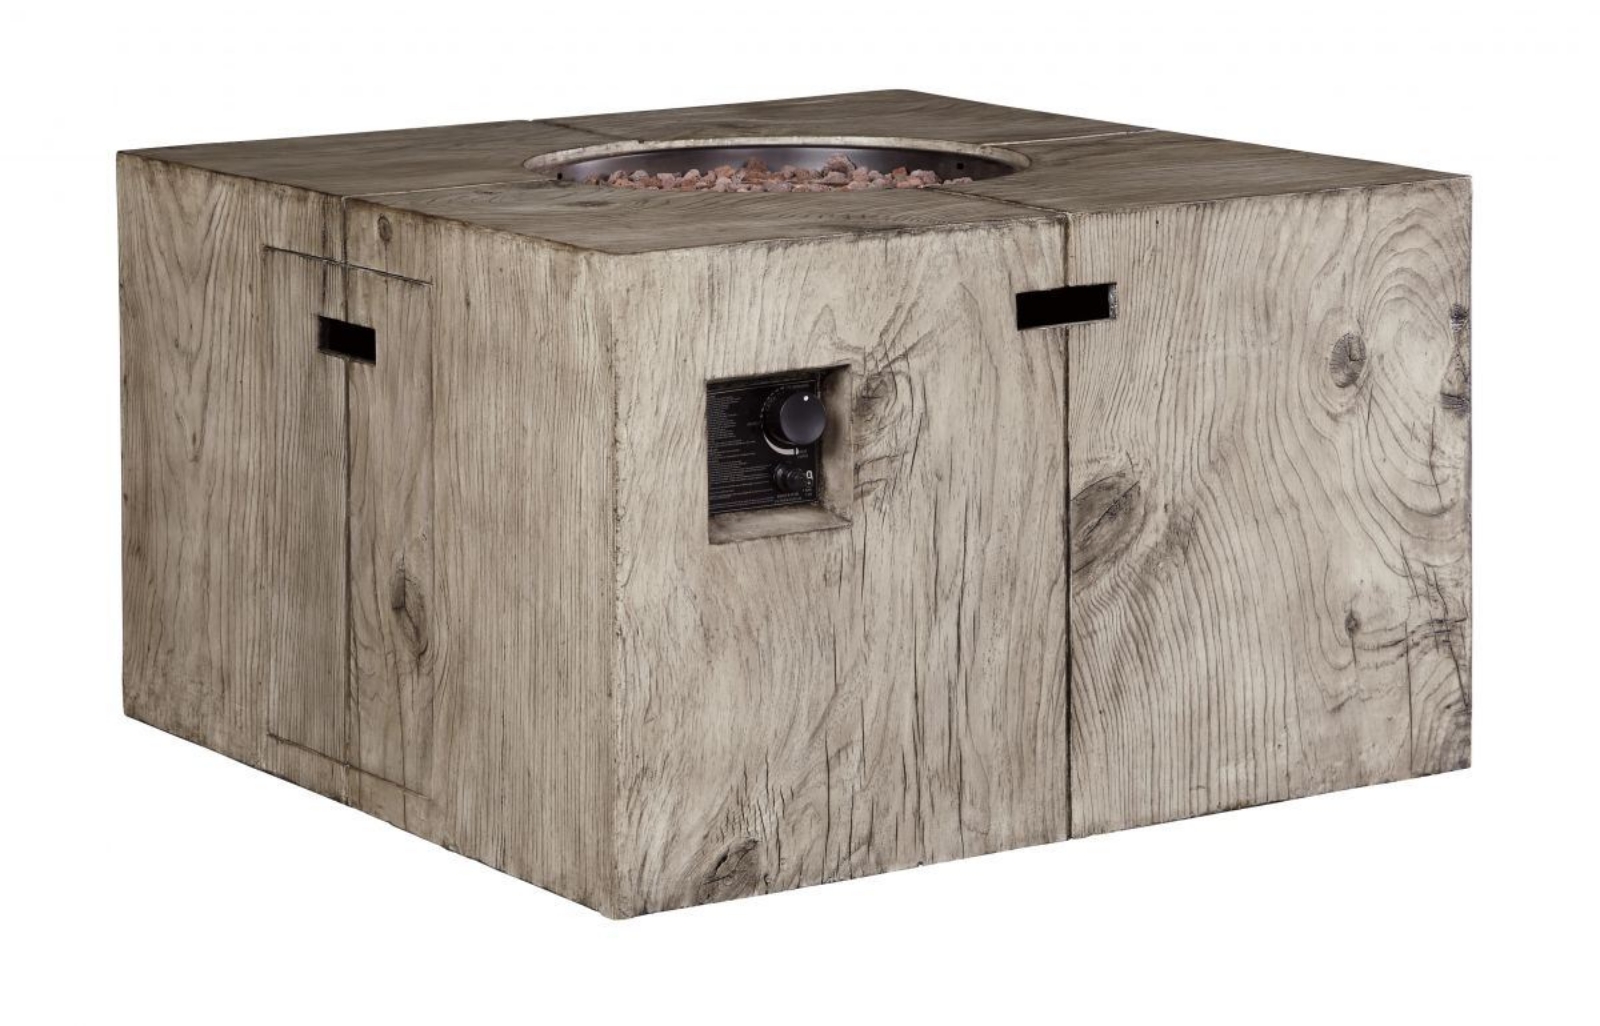 Picture of Peachstone Patio Fire Pit Table